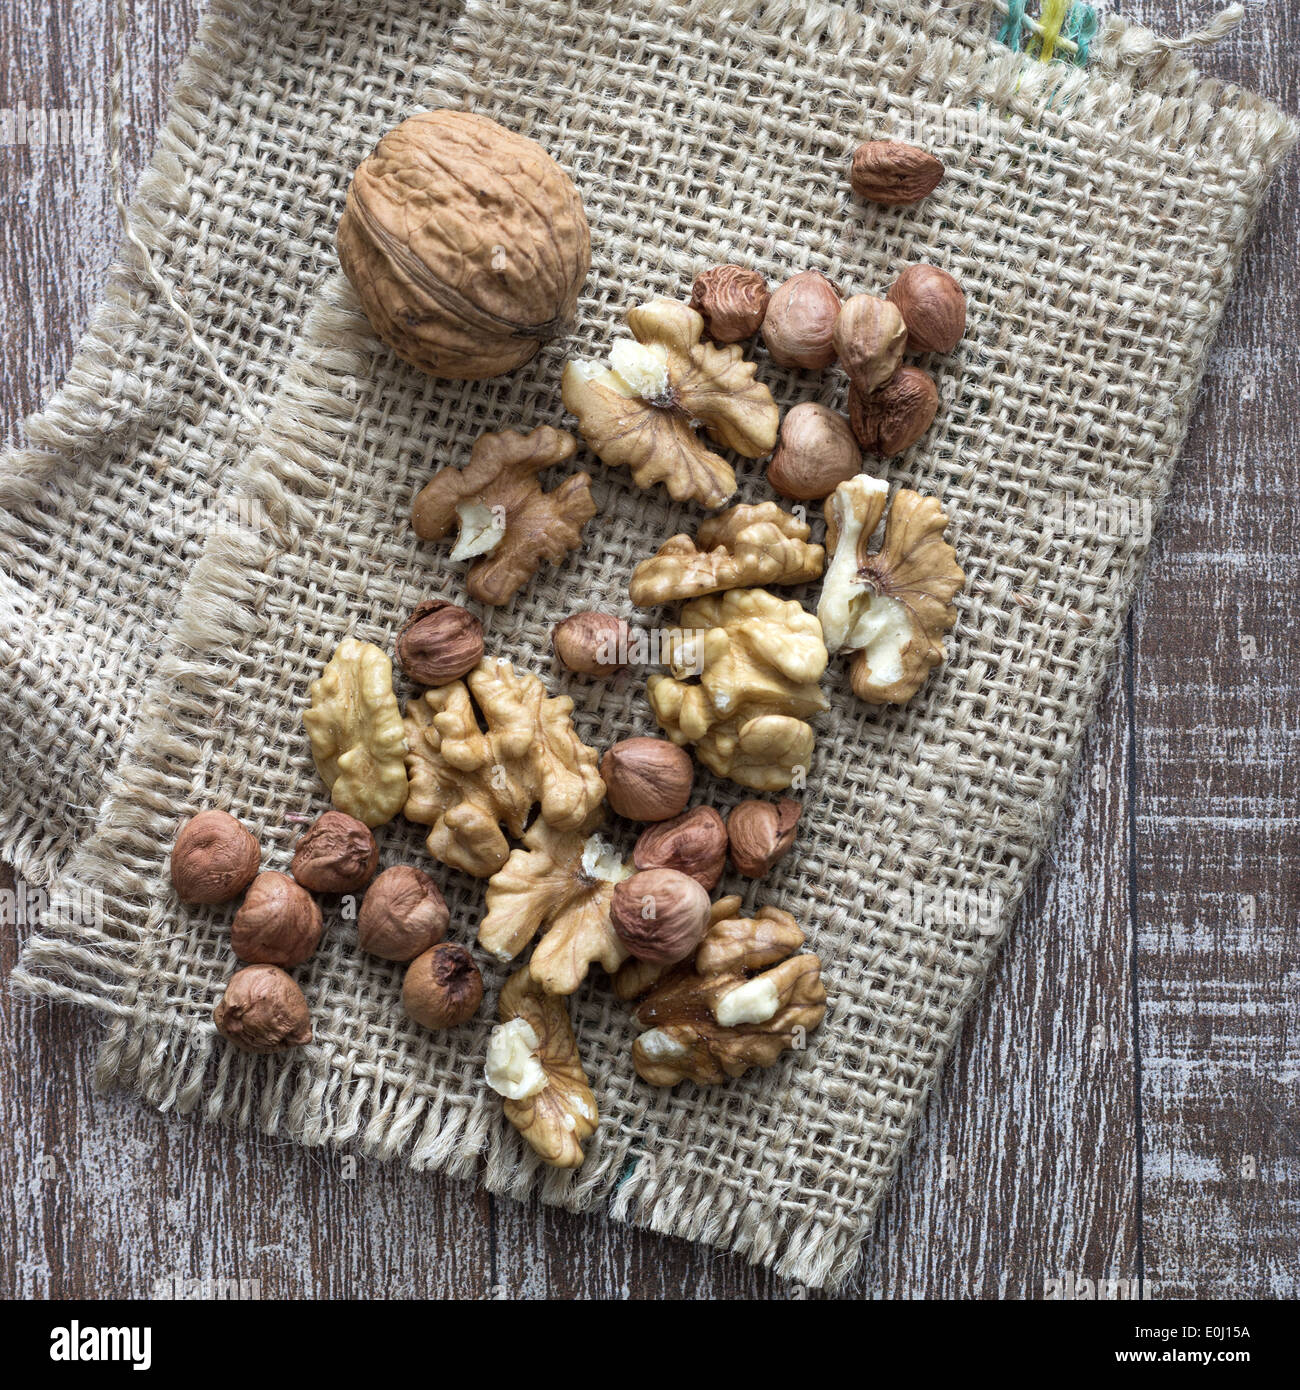 walnuts and hazelnuts on wooden table, close up Stock Photo